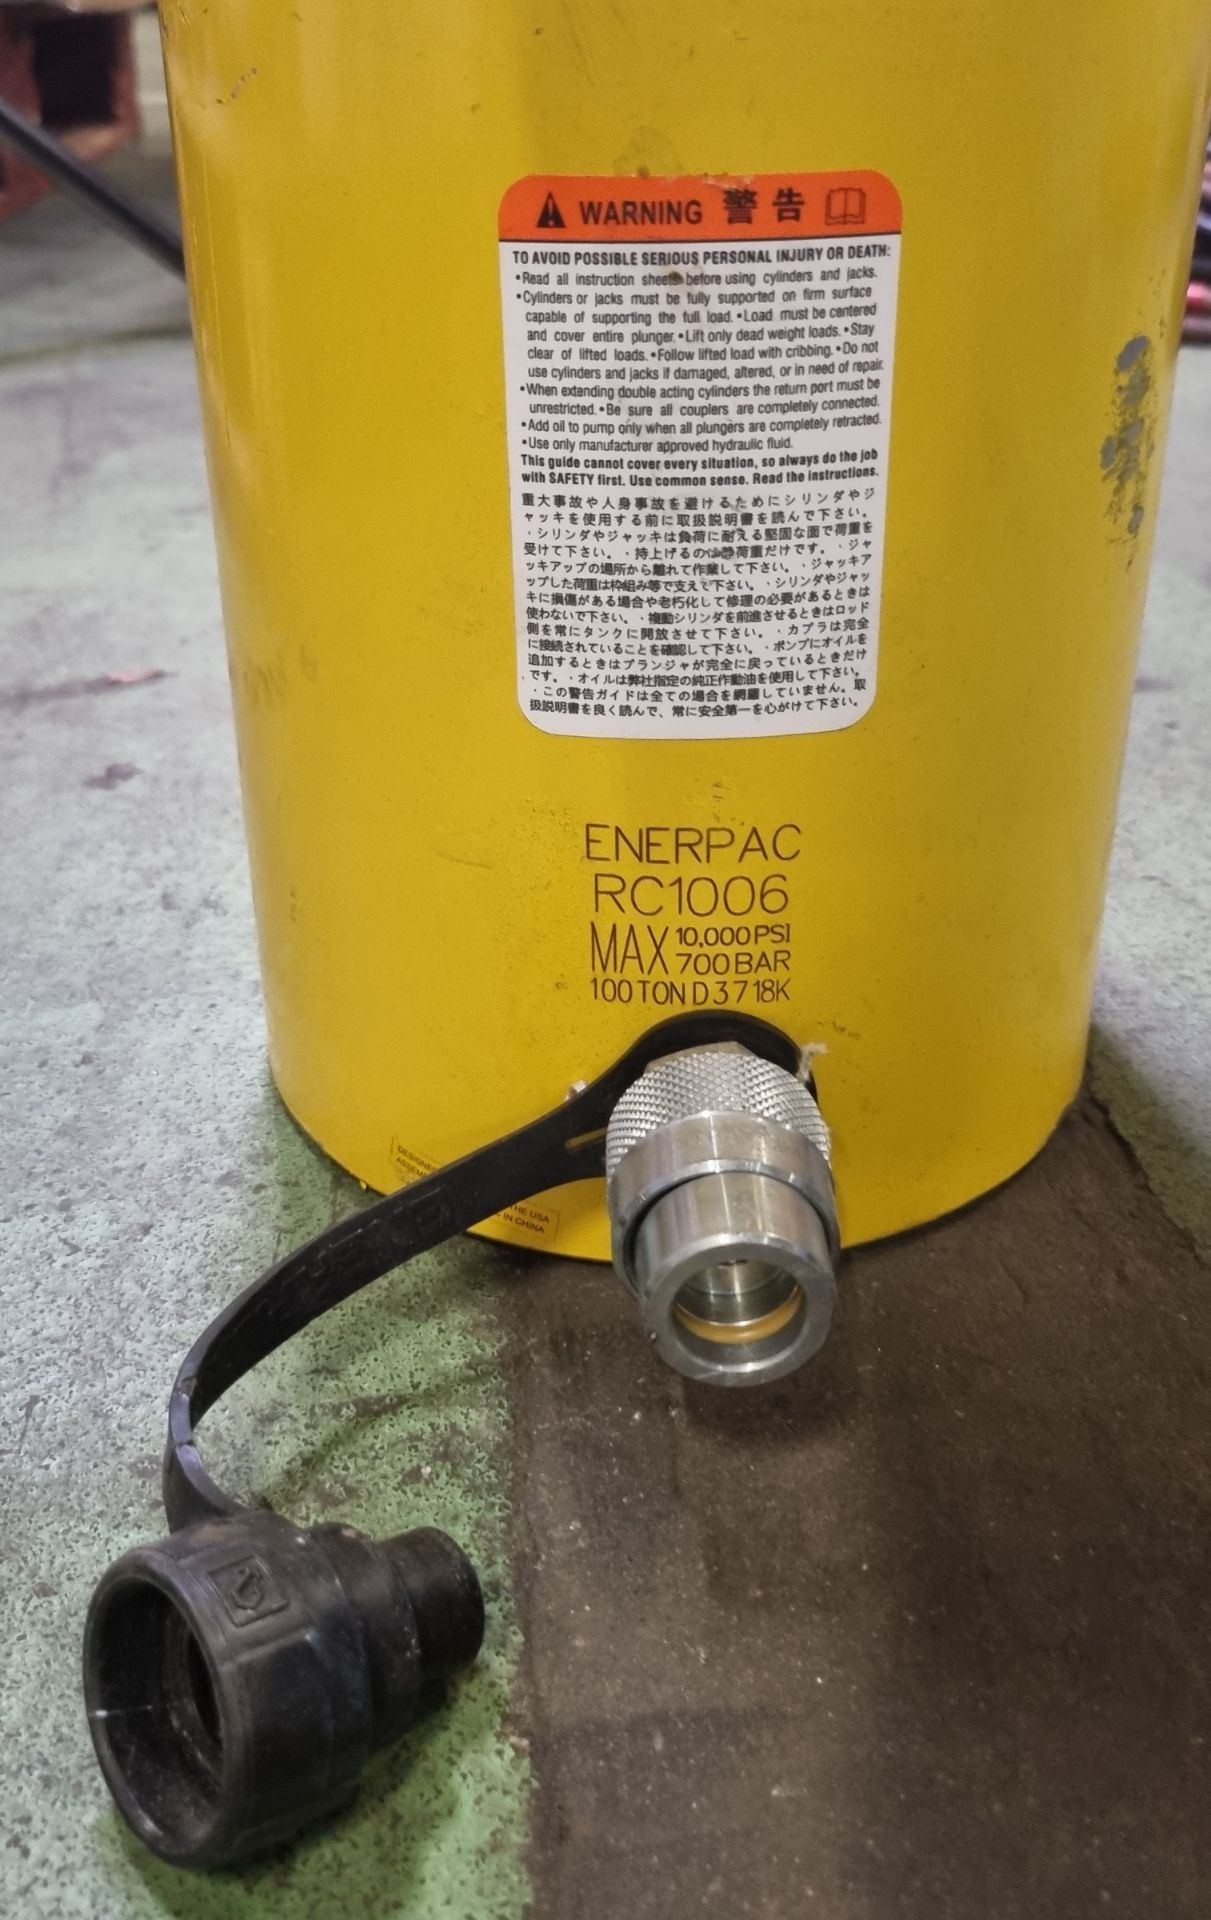 Enerpac RC1006 hydraulic cylinder - 100 ton - 10000 PSI (700 BAR) - Image 4 of 4